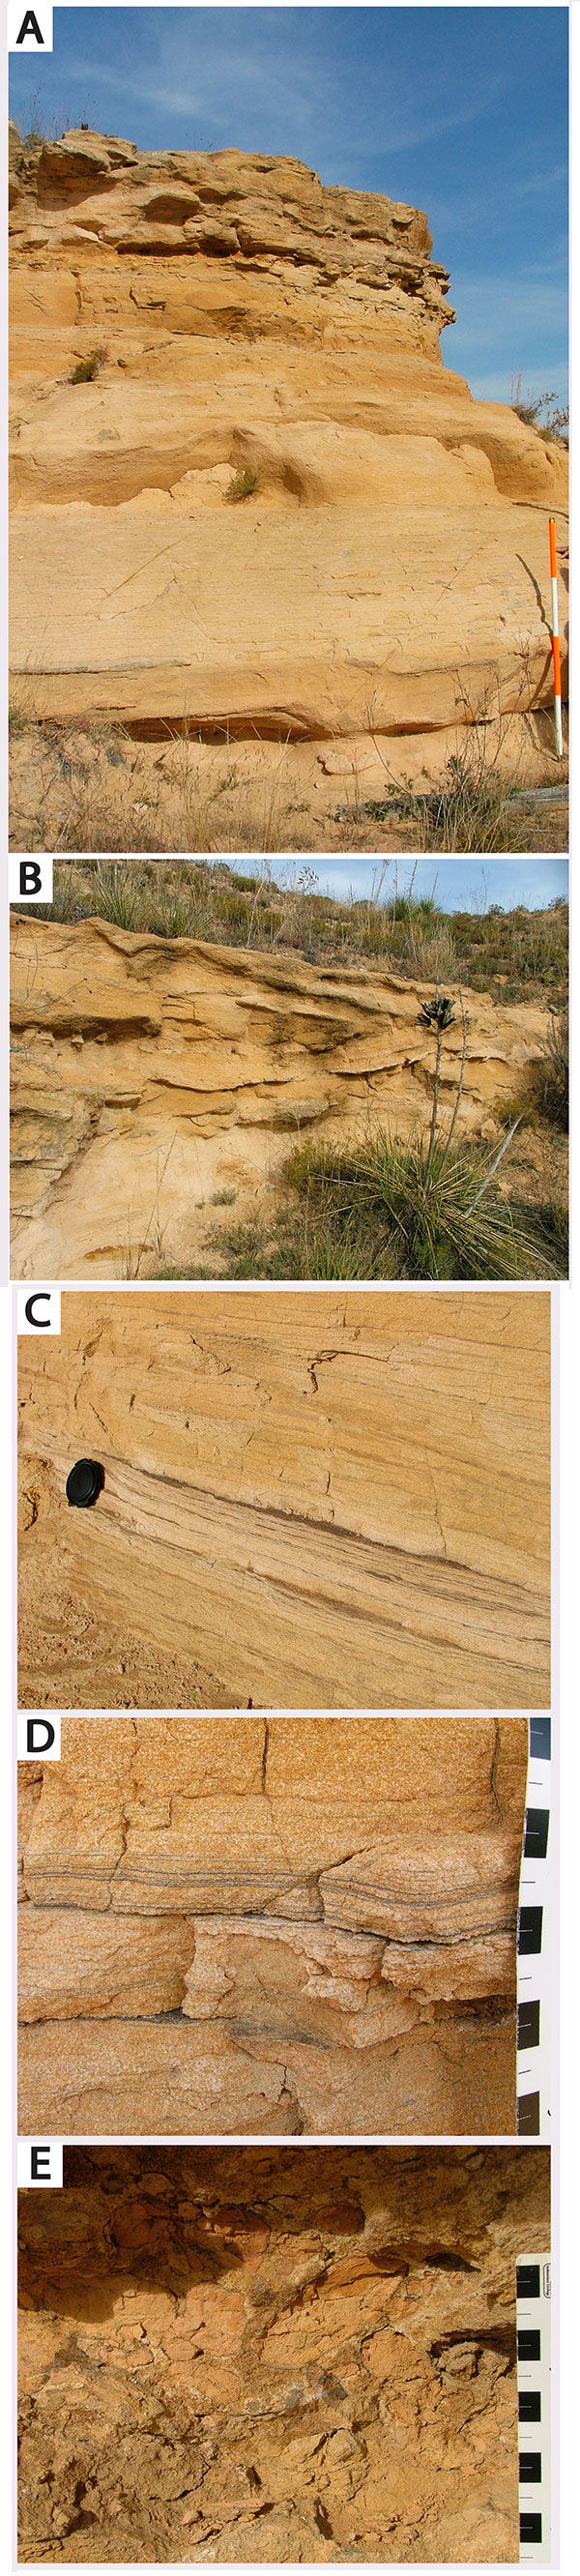 Five color photos. A is sandstone and conglomeratic deposits, B is trough cross-bedded sandstone, C is mud-draped laminae, D is close-up of the planar-laminated sandstone facies, E is red beds rip-up clasts of mudstone clast conglomerate facies.